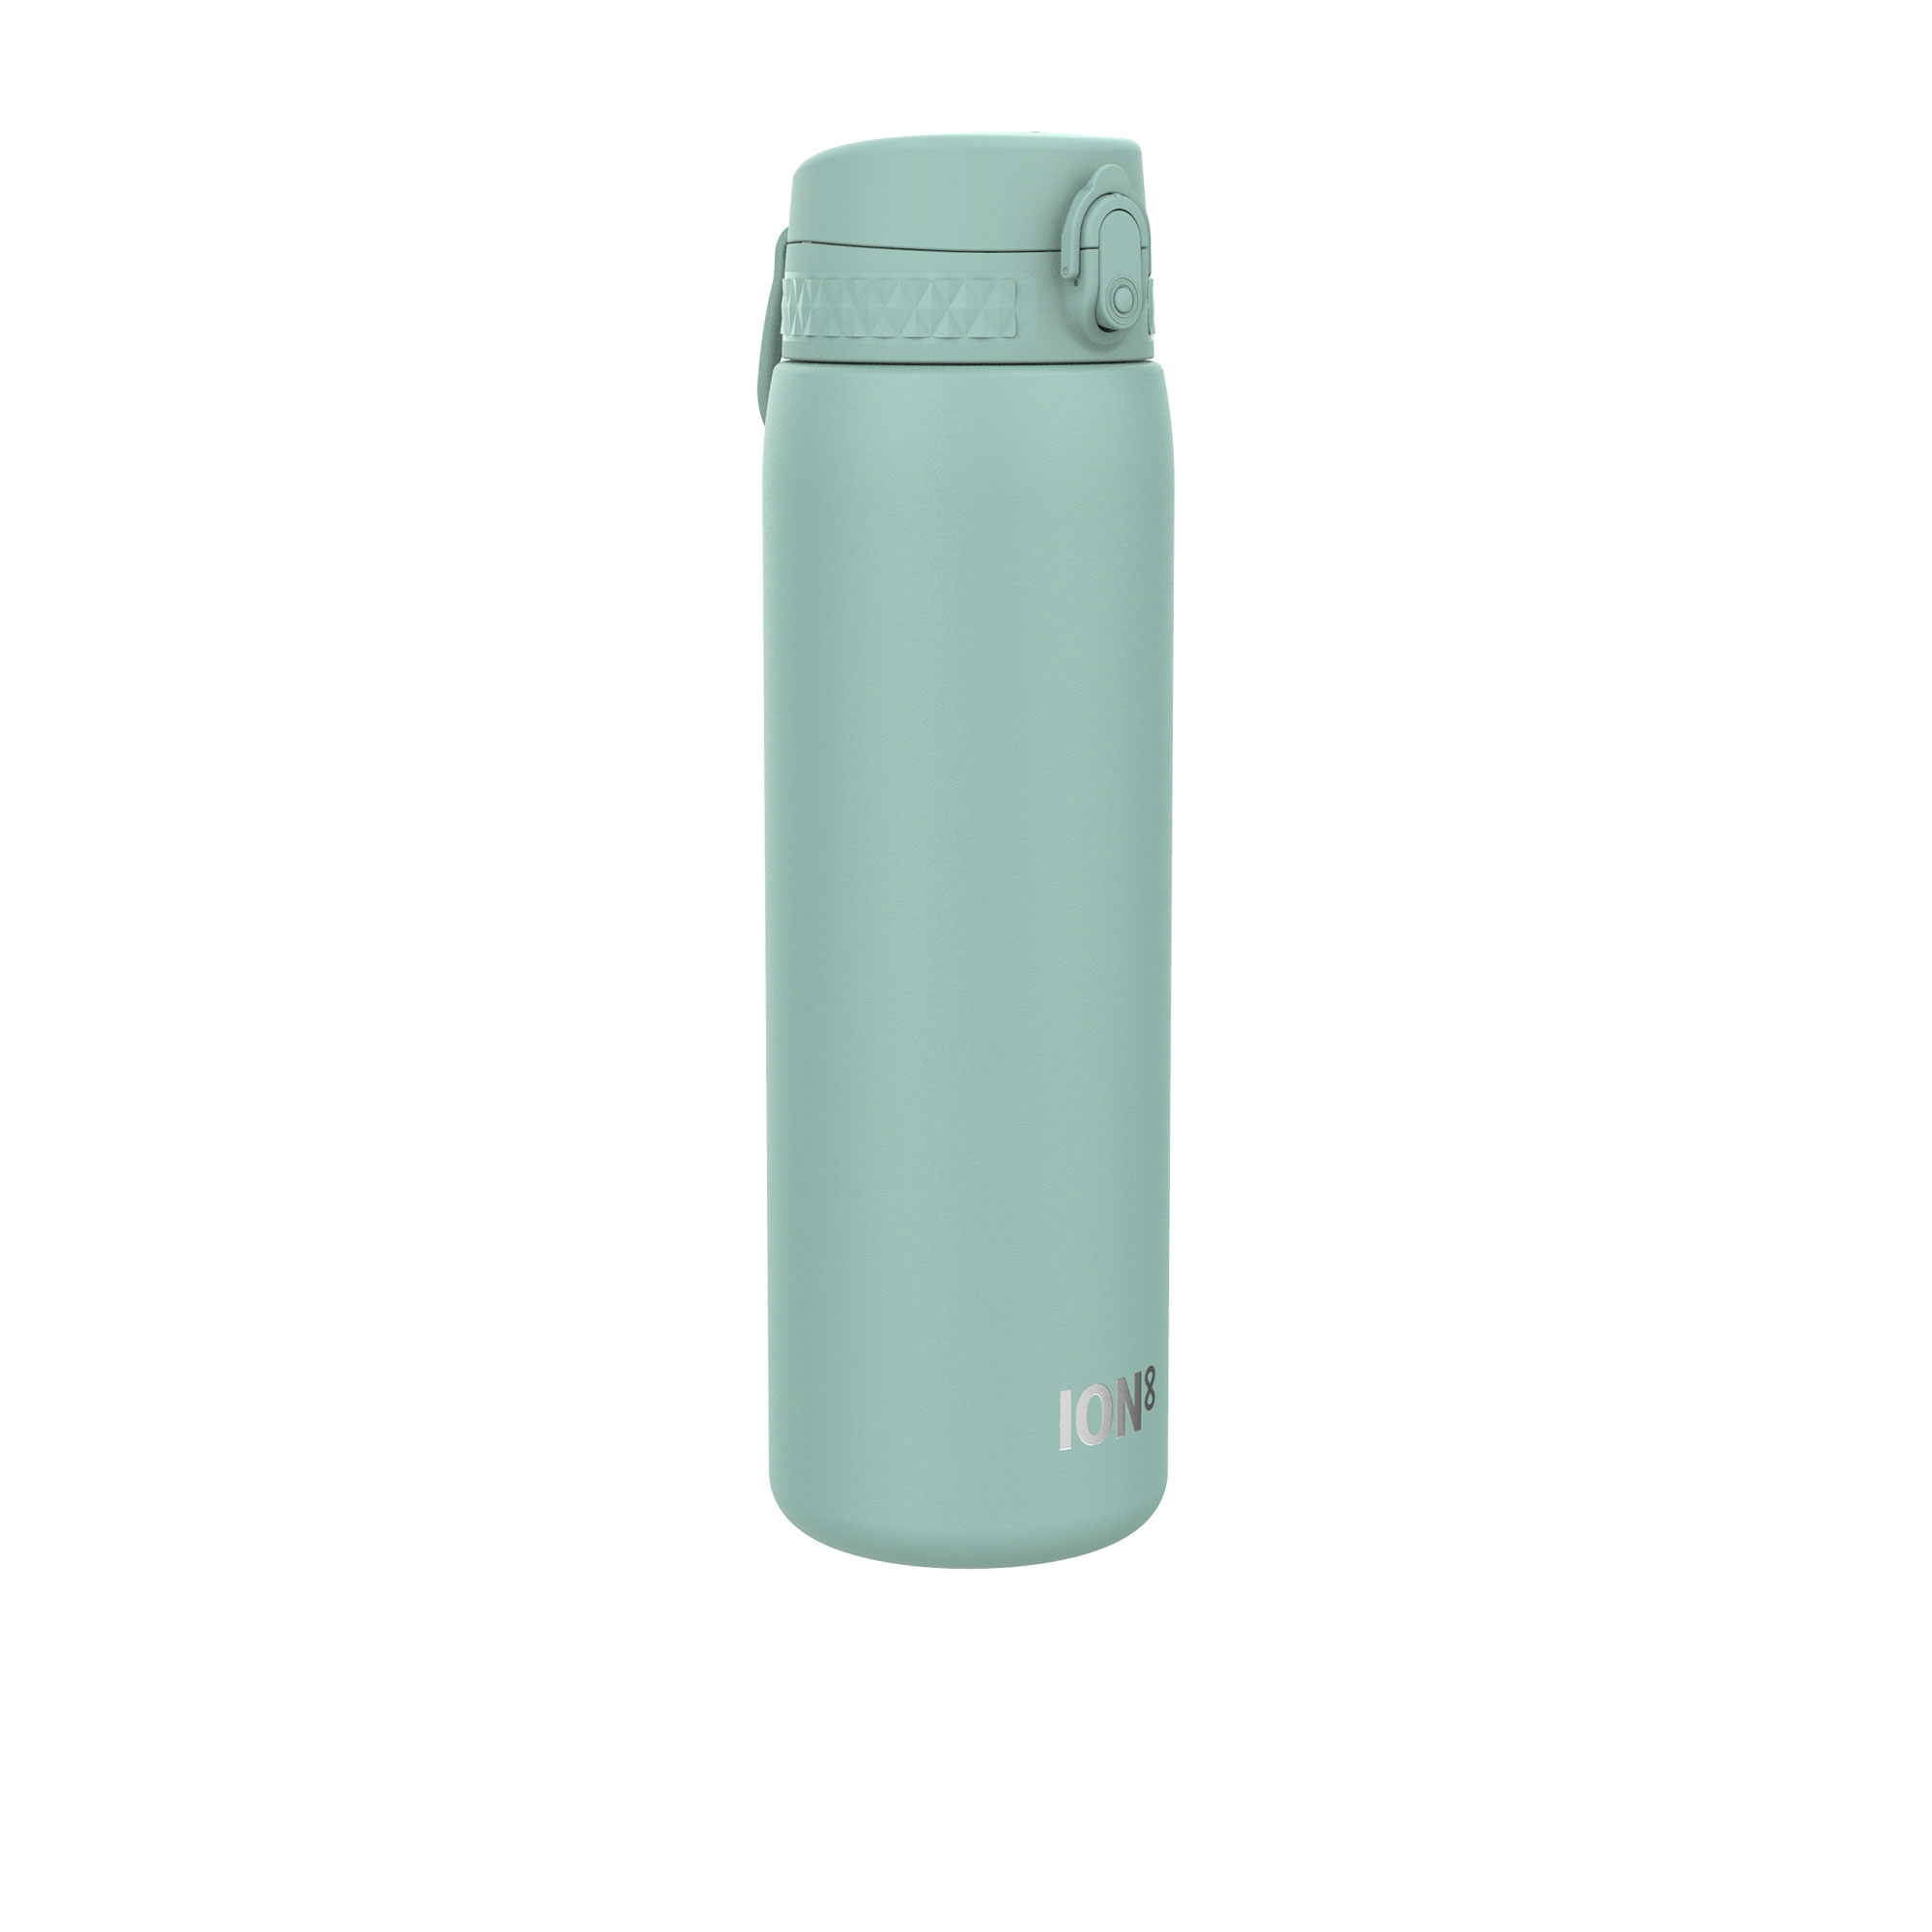 Ion8 Quench Insulated Drink Bottle 920ml Turquoise Image 1